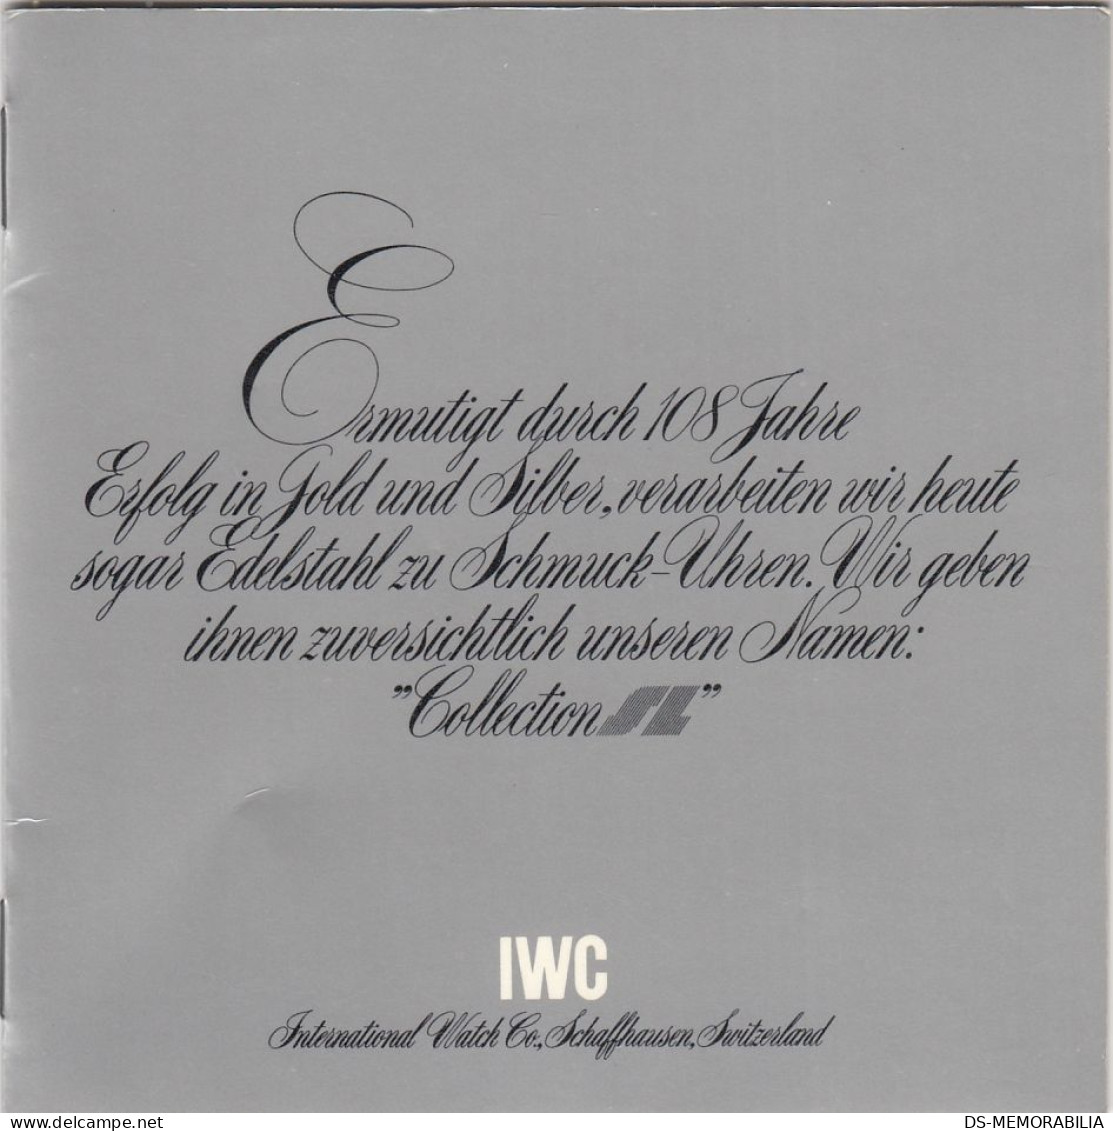 Vintage 1976 IWC Schaffhausen Catalogue & Price List Collection SL - Watches: Top-of-the-Line